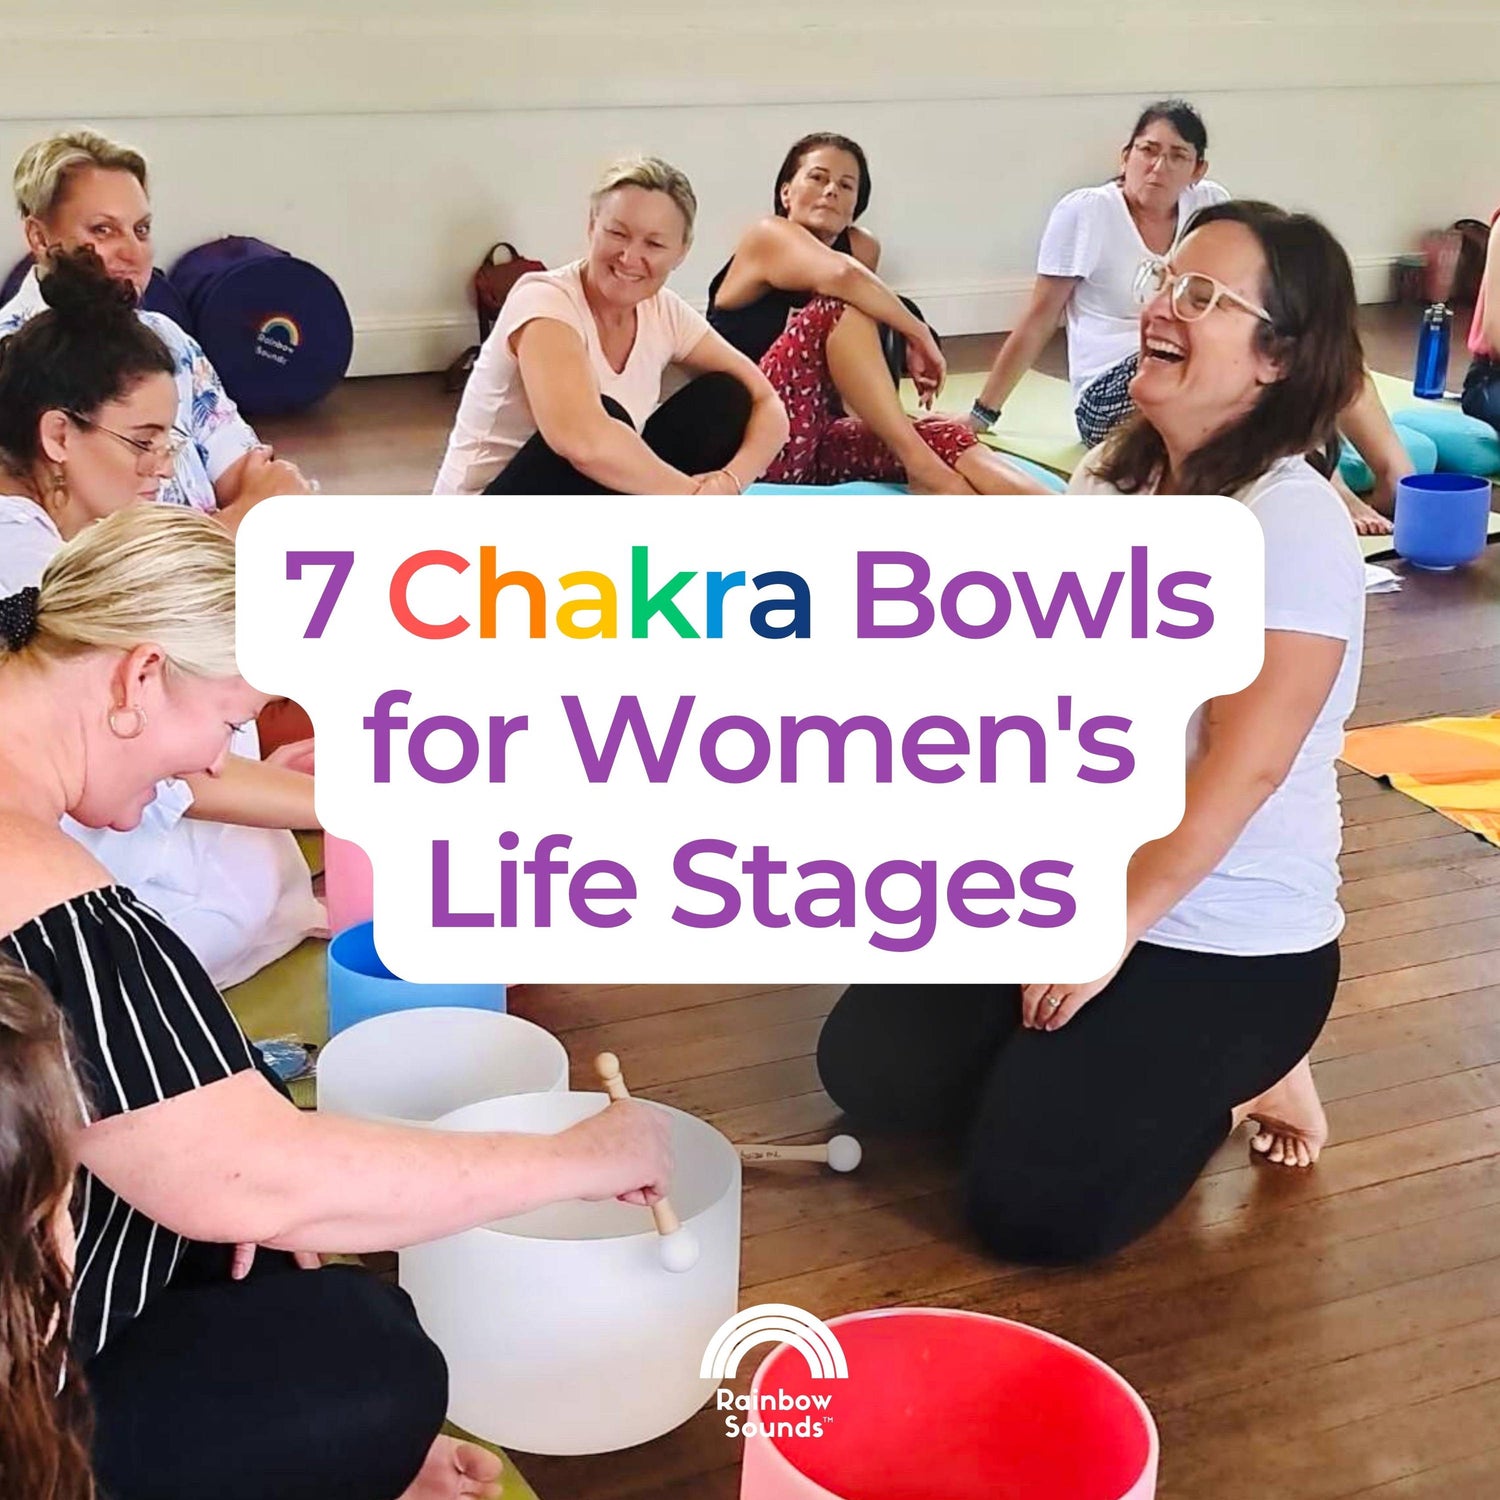 7 Chakra Bowls for Women's Life Stages